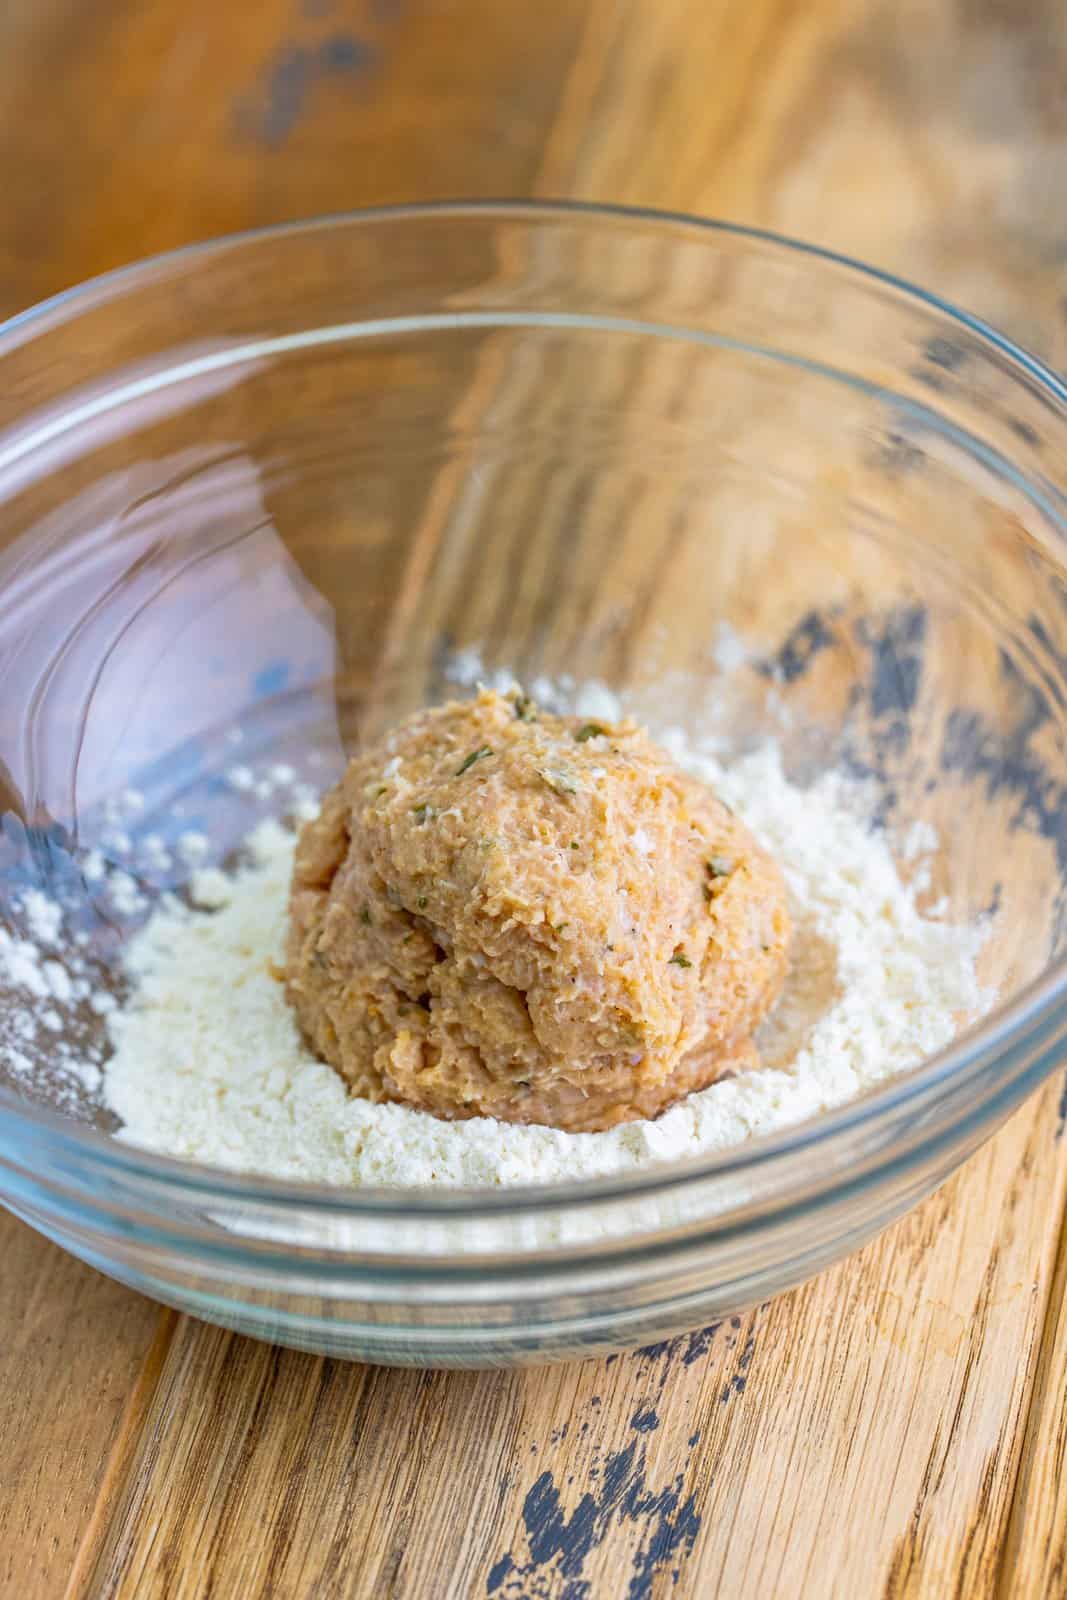 Ground chicken and spices in a ball in a bowl of flour.